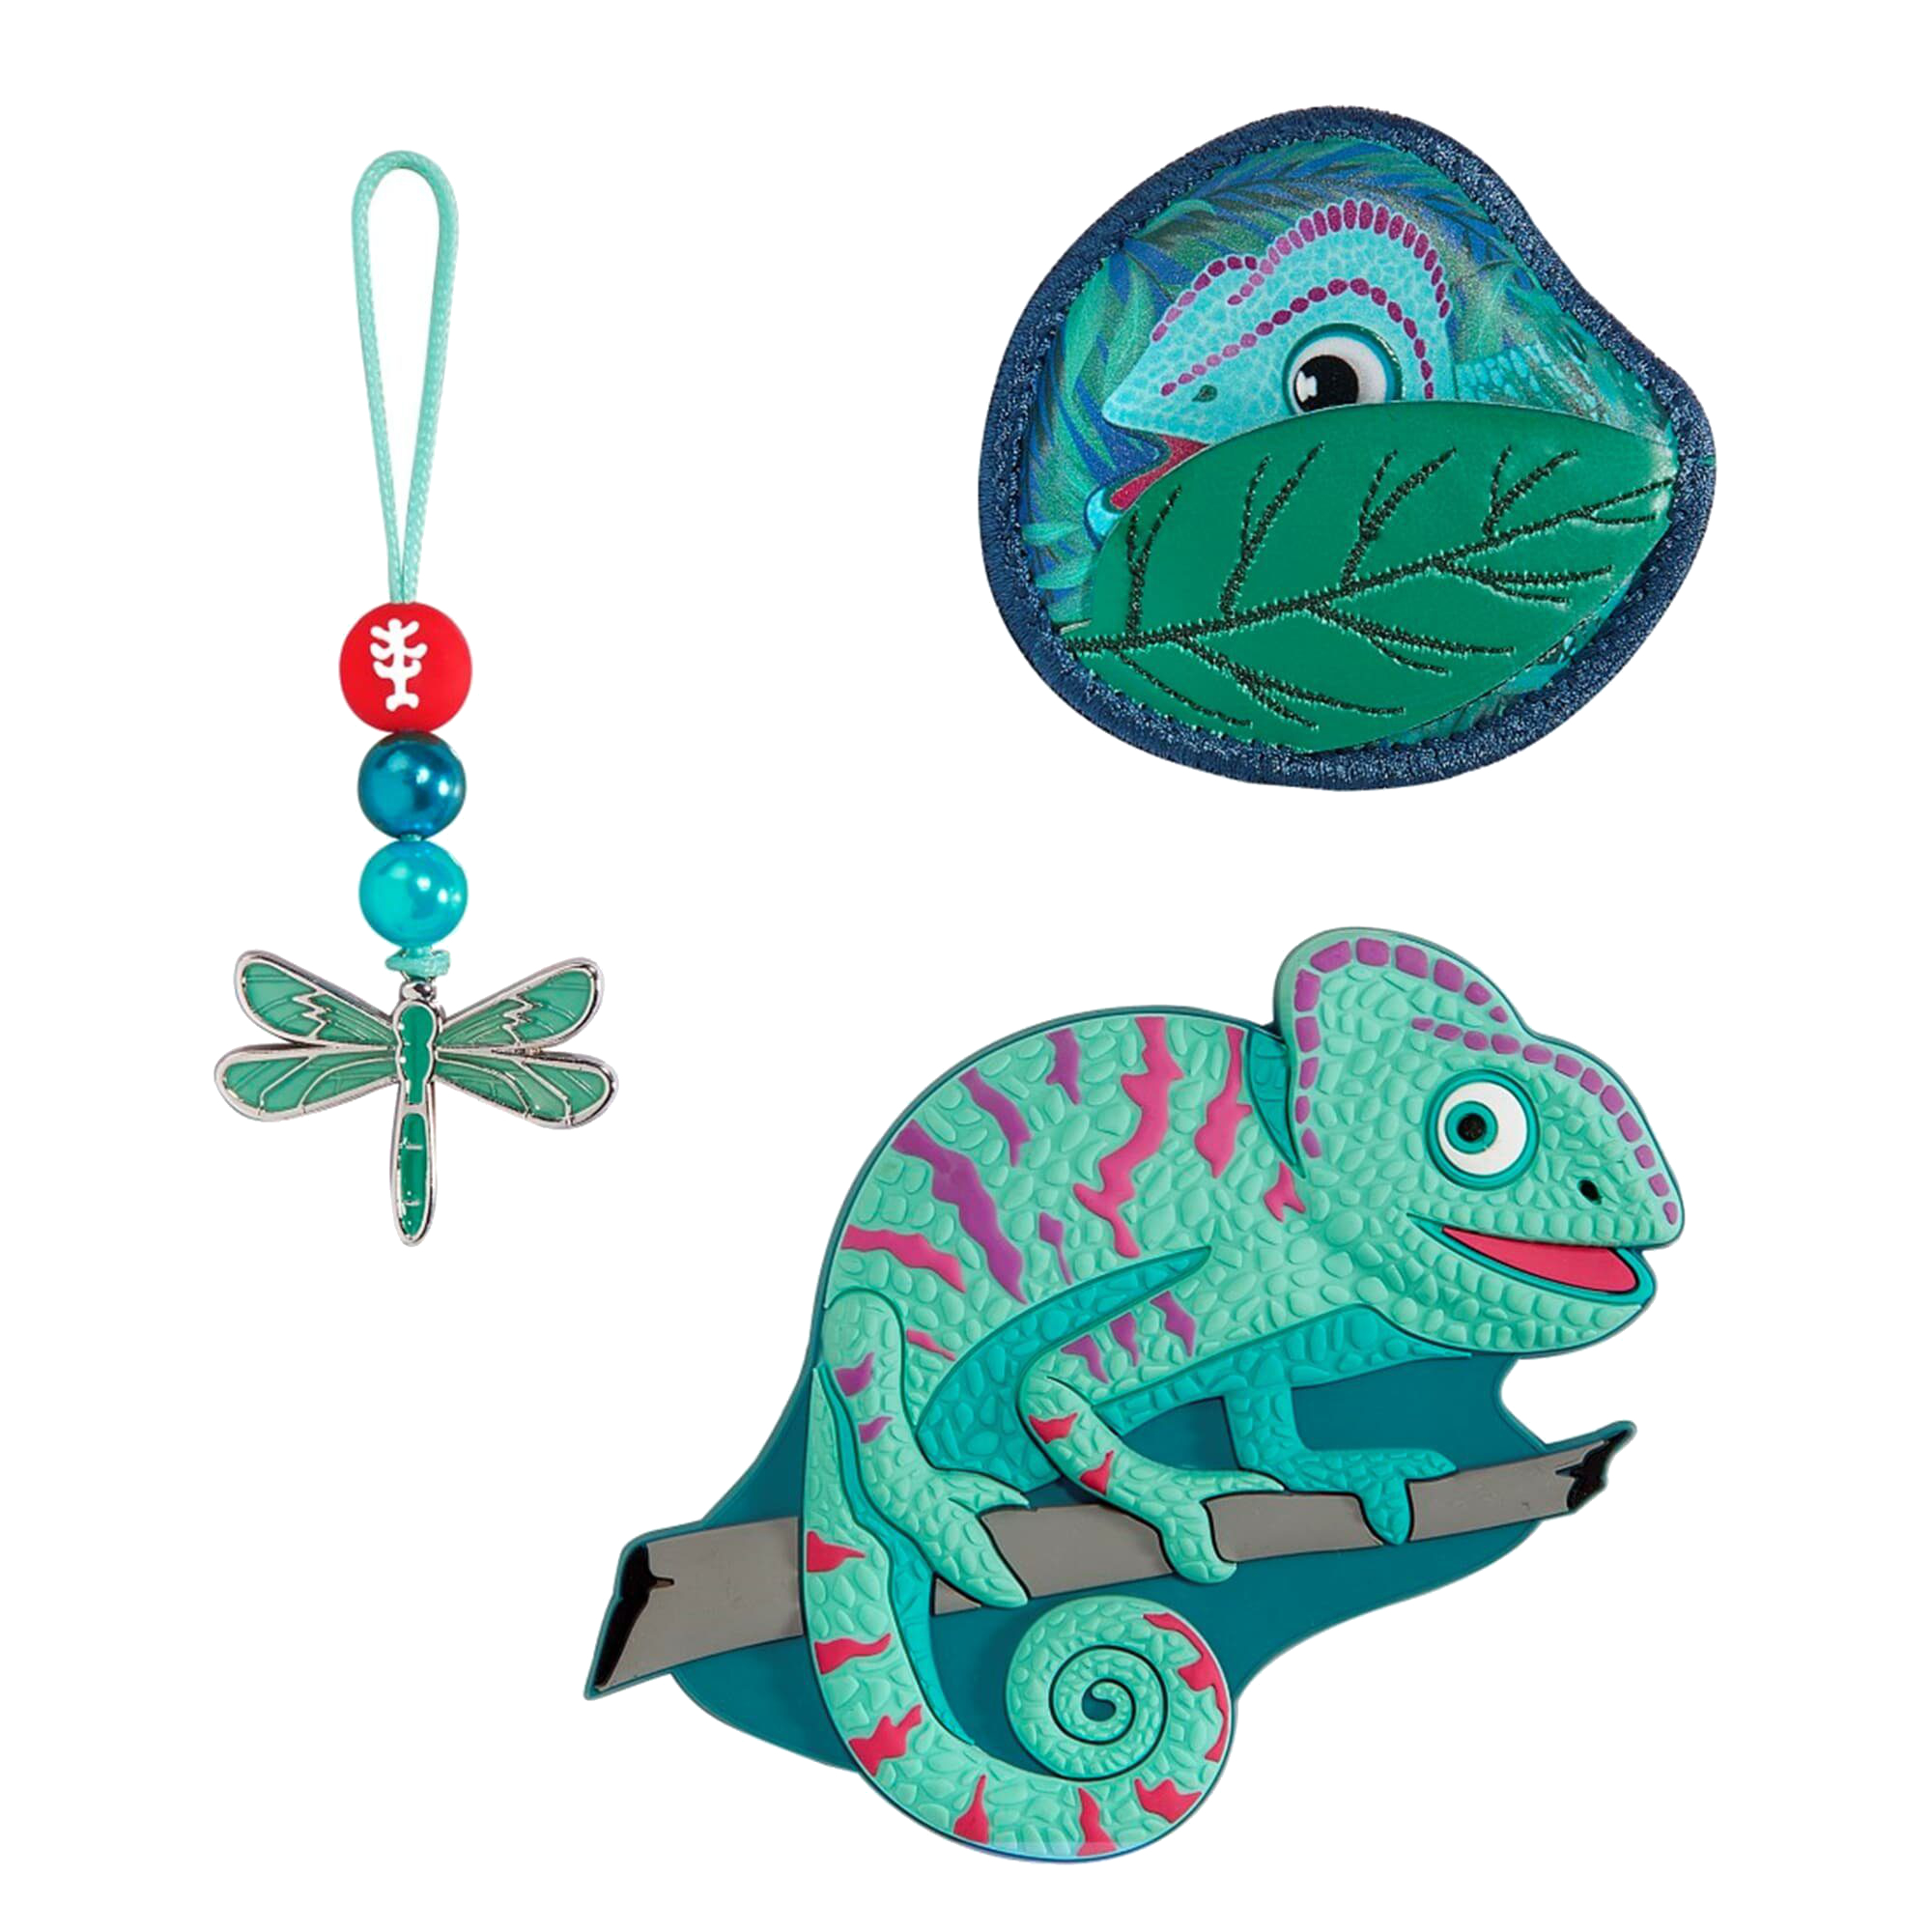 Step by Step 'Magic Mags' Wechselmotiv Tropical Chameleon